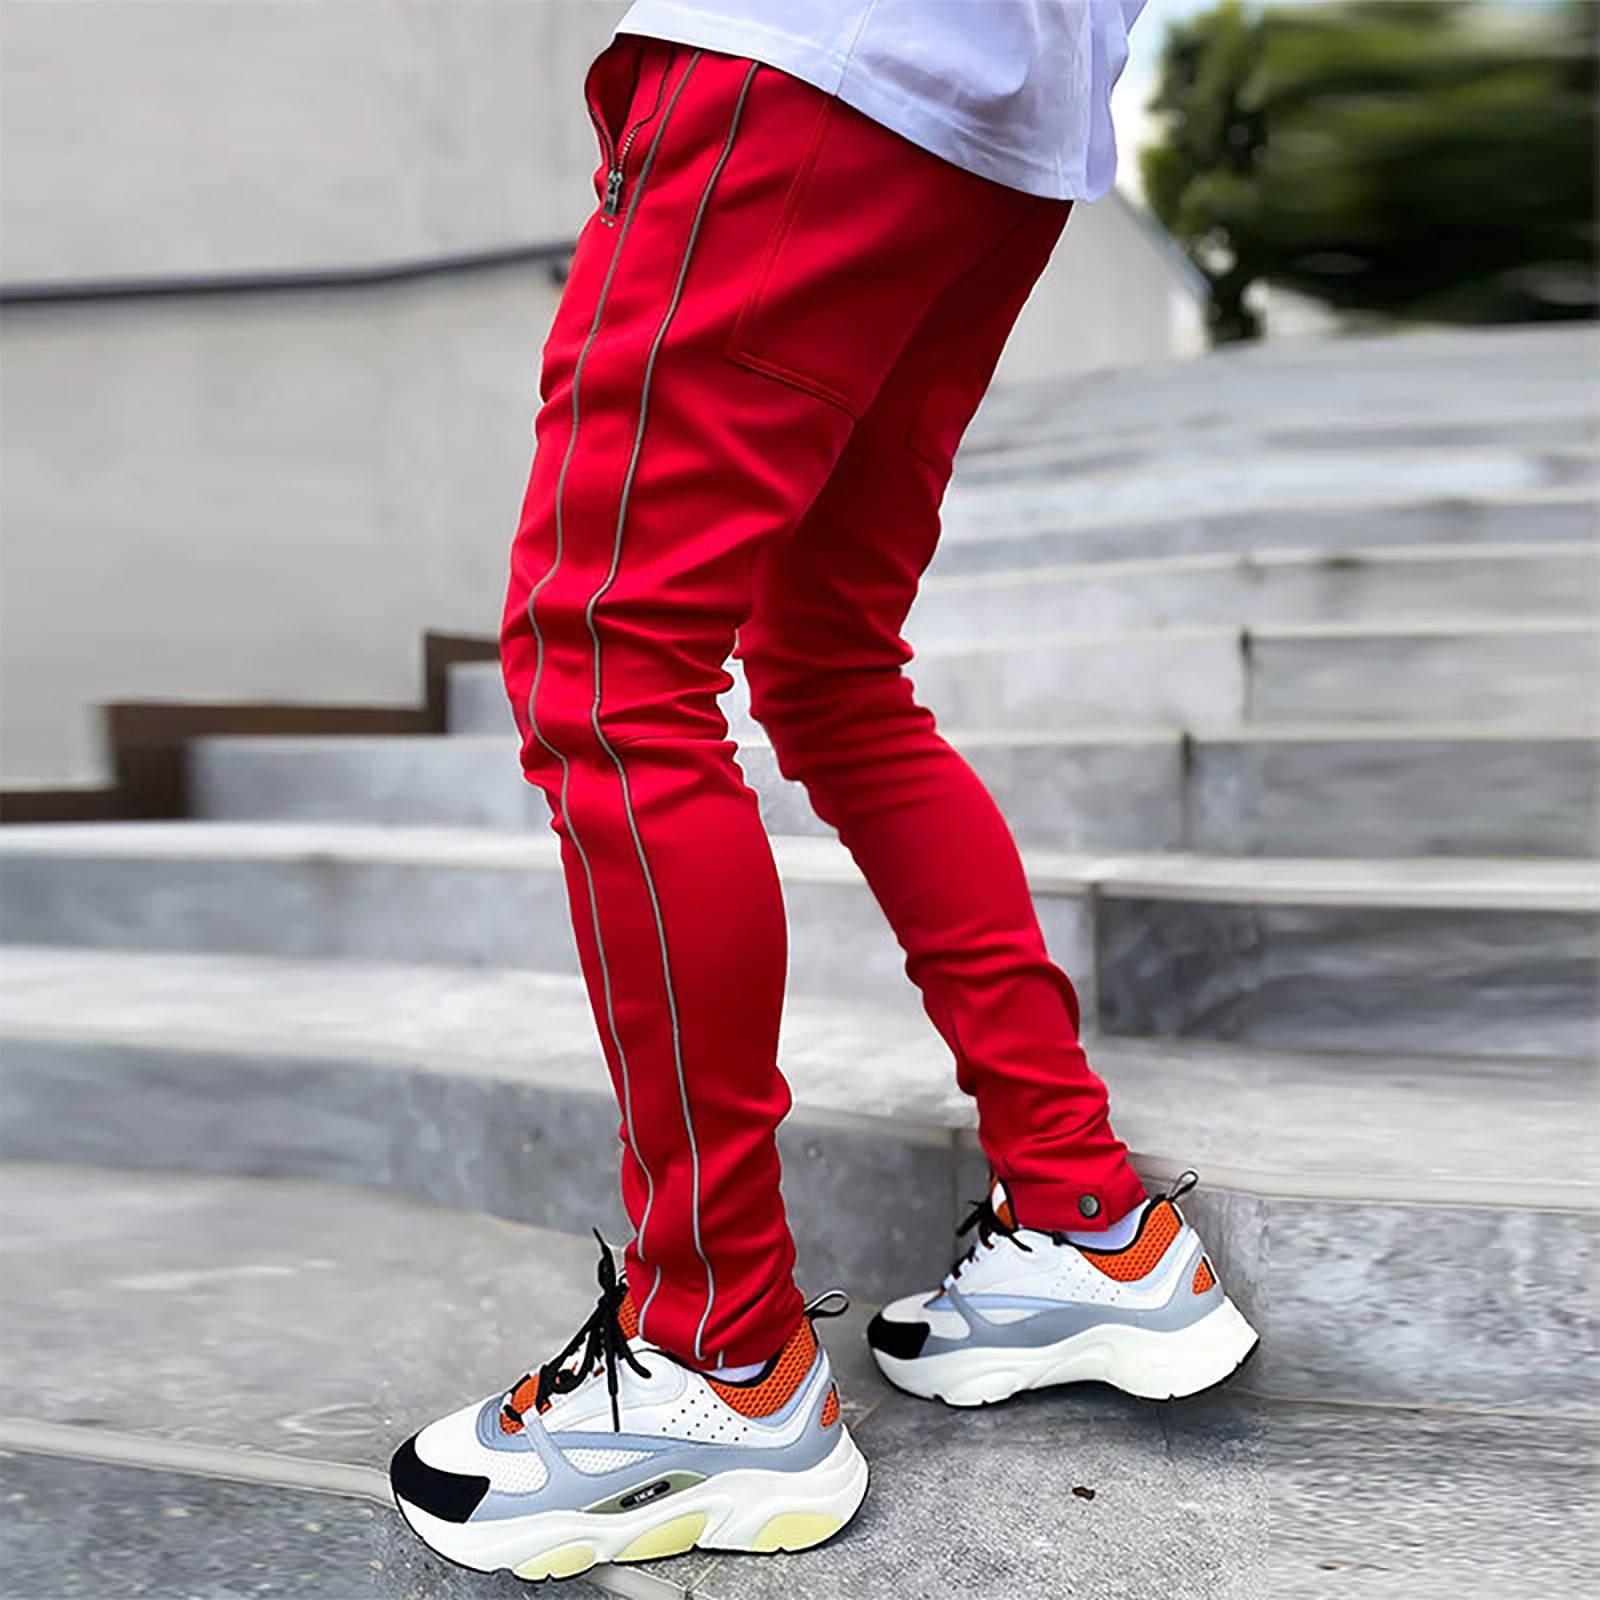 Red Track Pants 